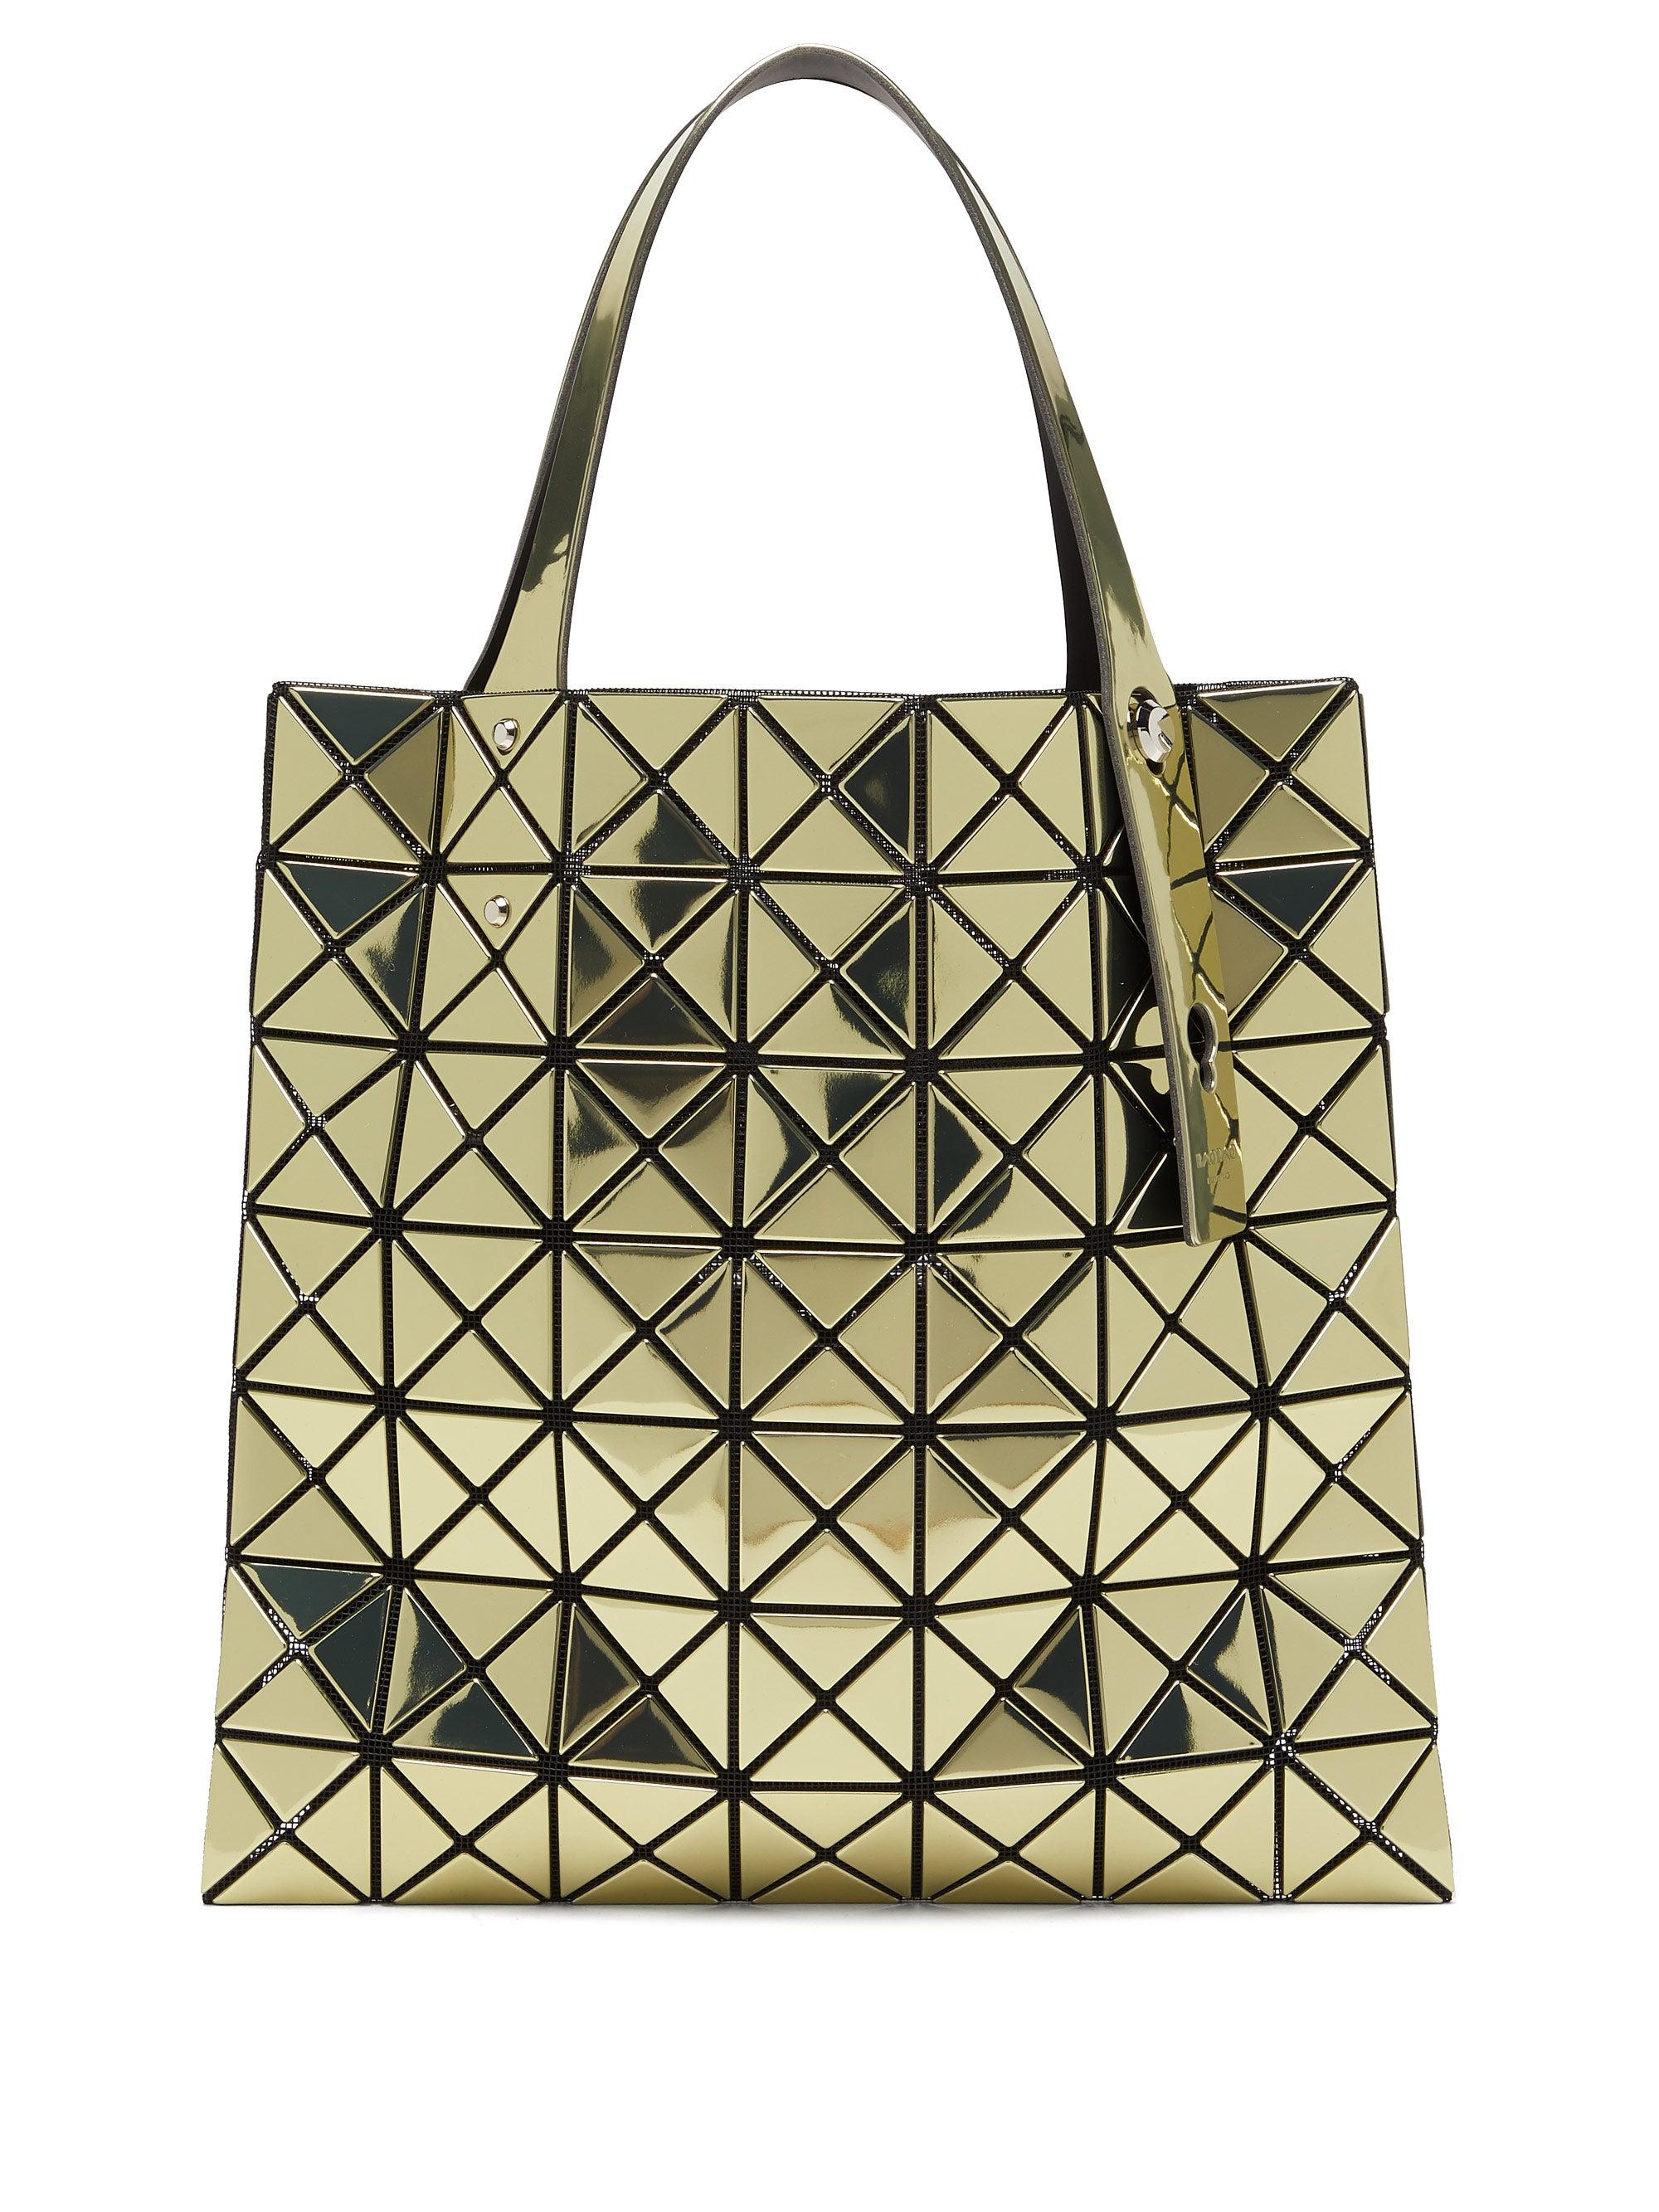 Bao Bao Issey Miyake Lucent Small Pvc Tote Bag in Gold (Metallic) - Lyst